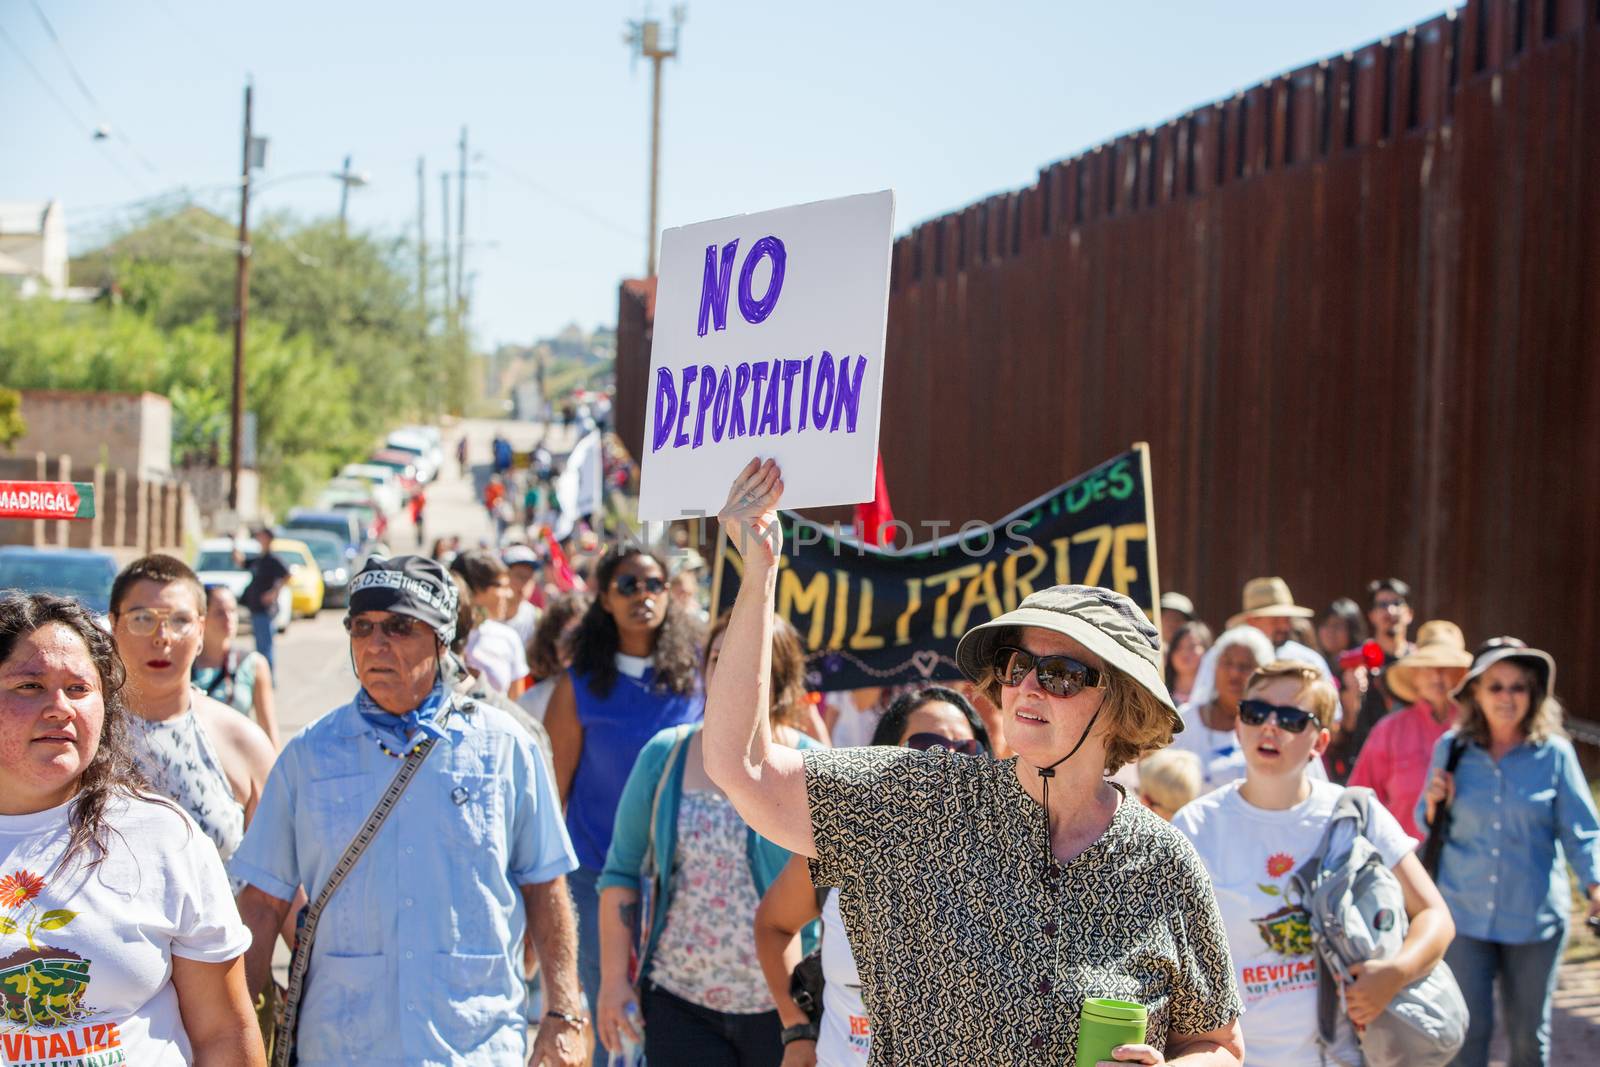 NOGALES, AZ - OCTOBER 08: Supporters and veterans protesting deportation policies at the United States and Mexico border on October 08, 2016 in Nogales, AZ, USA.